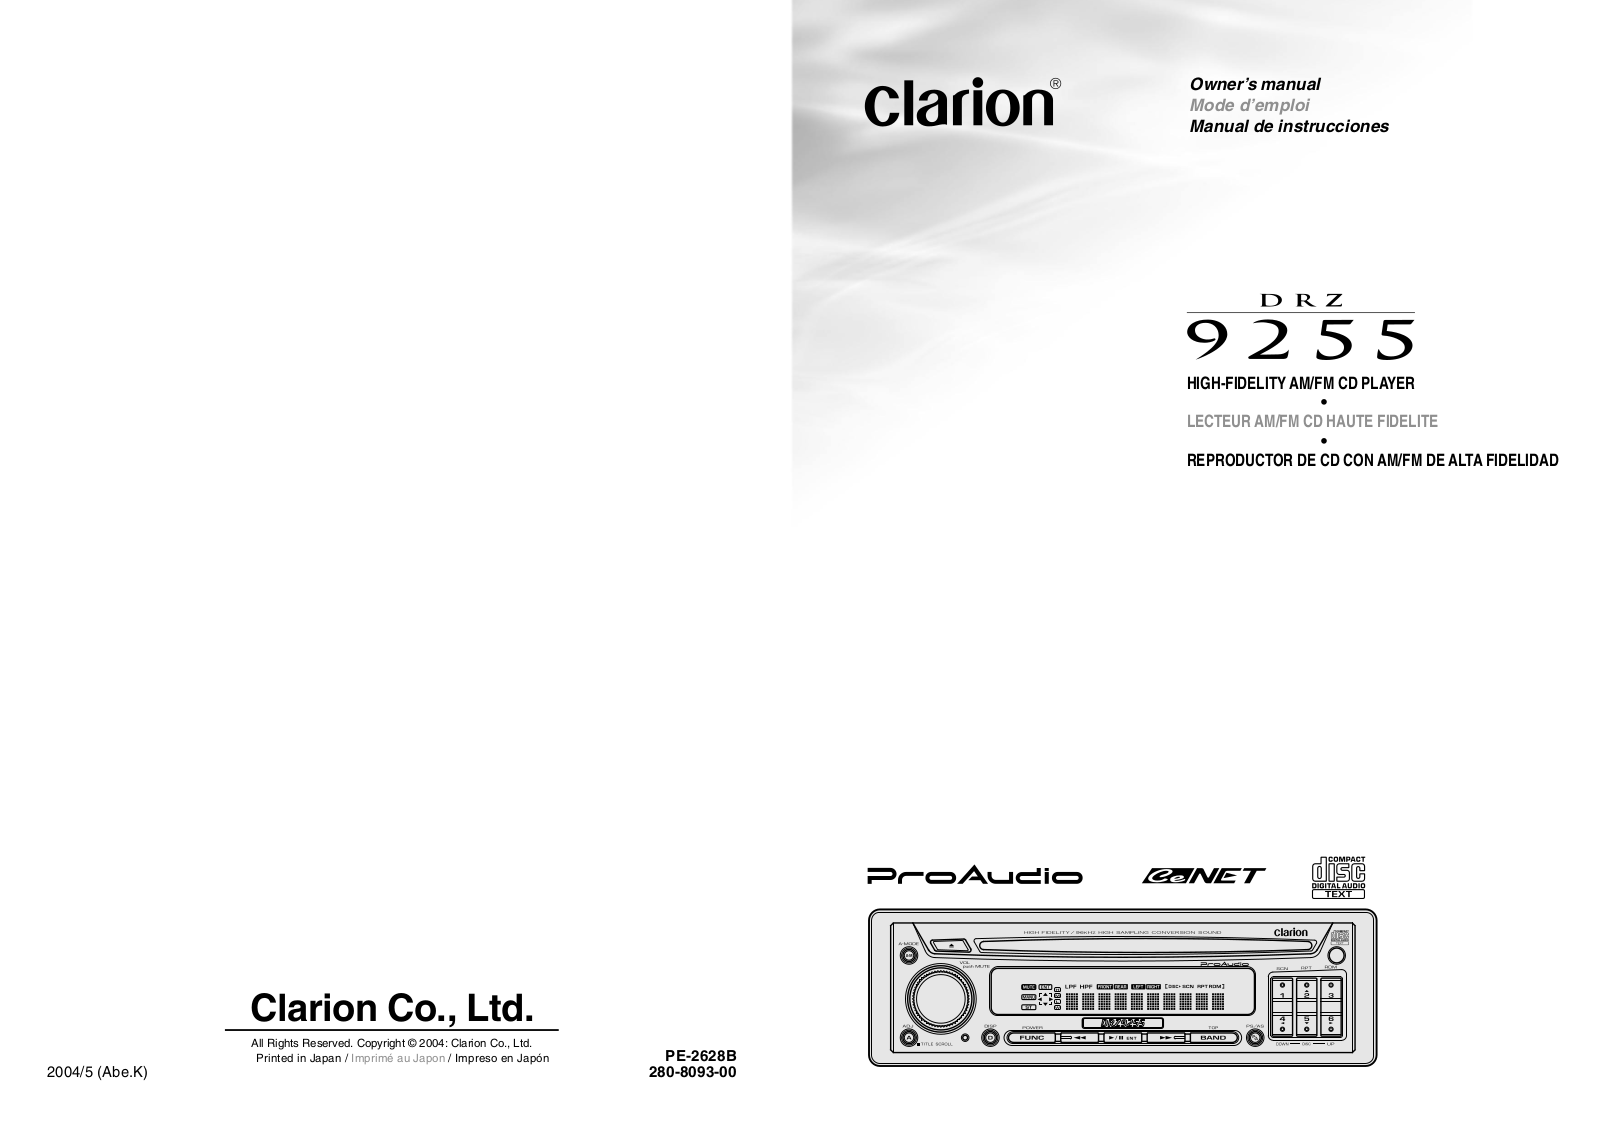 Clarion DRZ 9255 User Manual